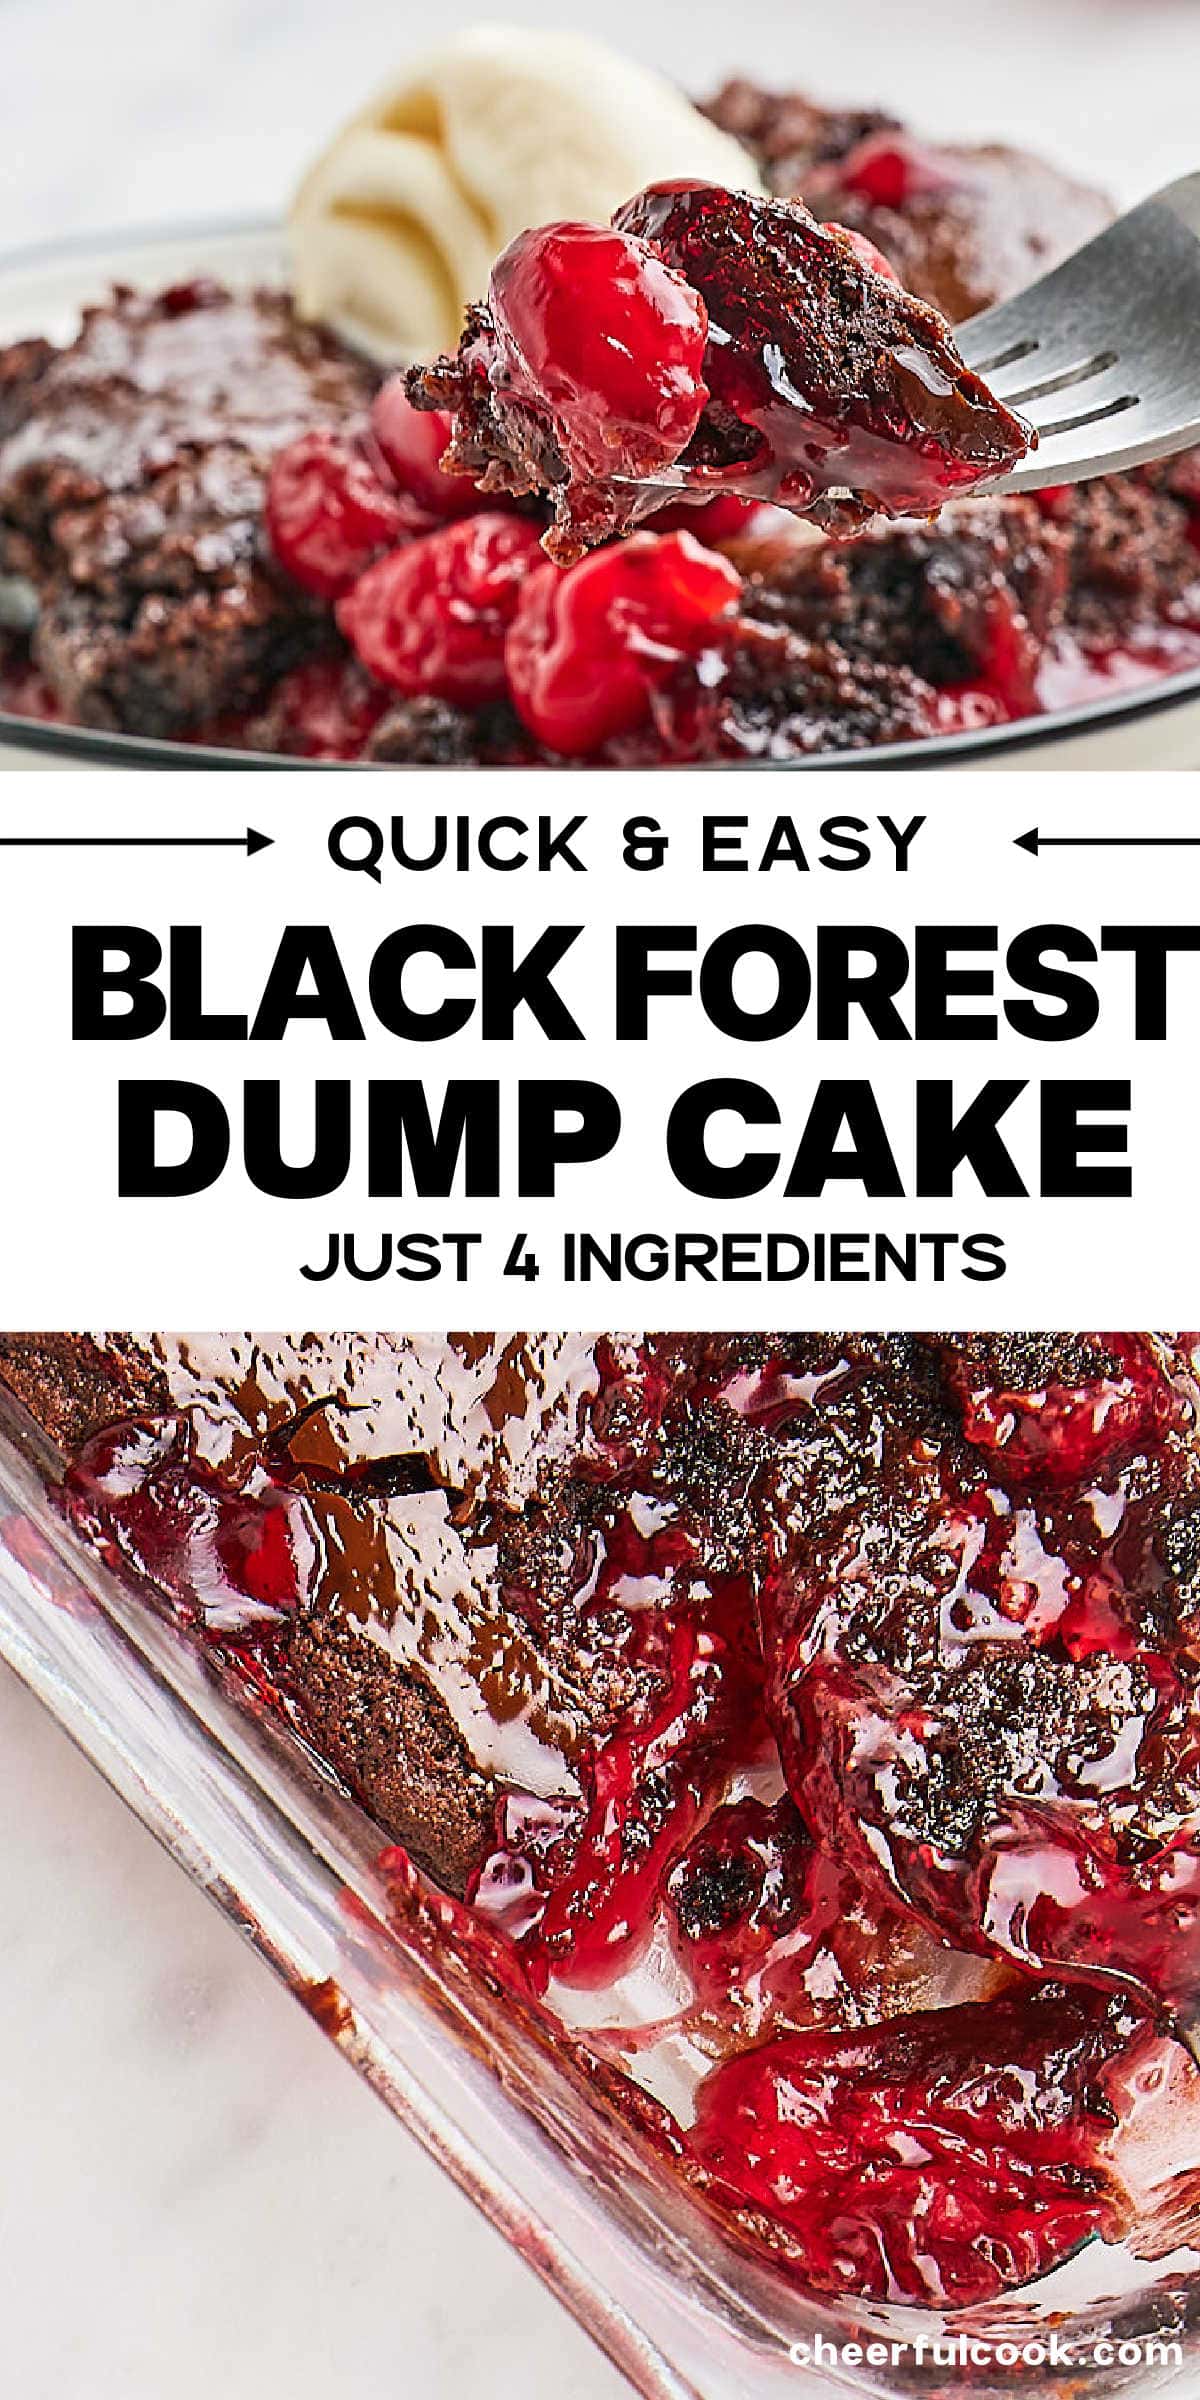 Get ready to enjoy our delightfully simple Black Forest Dump Cake. This recipe brings the magic of chocolate and cherries together to create an oh-so-tempting treat you just can't resist! Great for any occasion - be it a birthday bash, a cozy dinner, or just because. #cheerfulcook #BlackForestDumpCake #DumpCake #EasyDesserts #CherryChocolate via @cheerfulcook